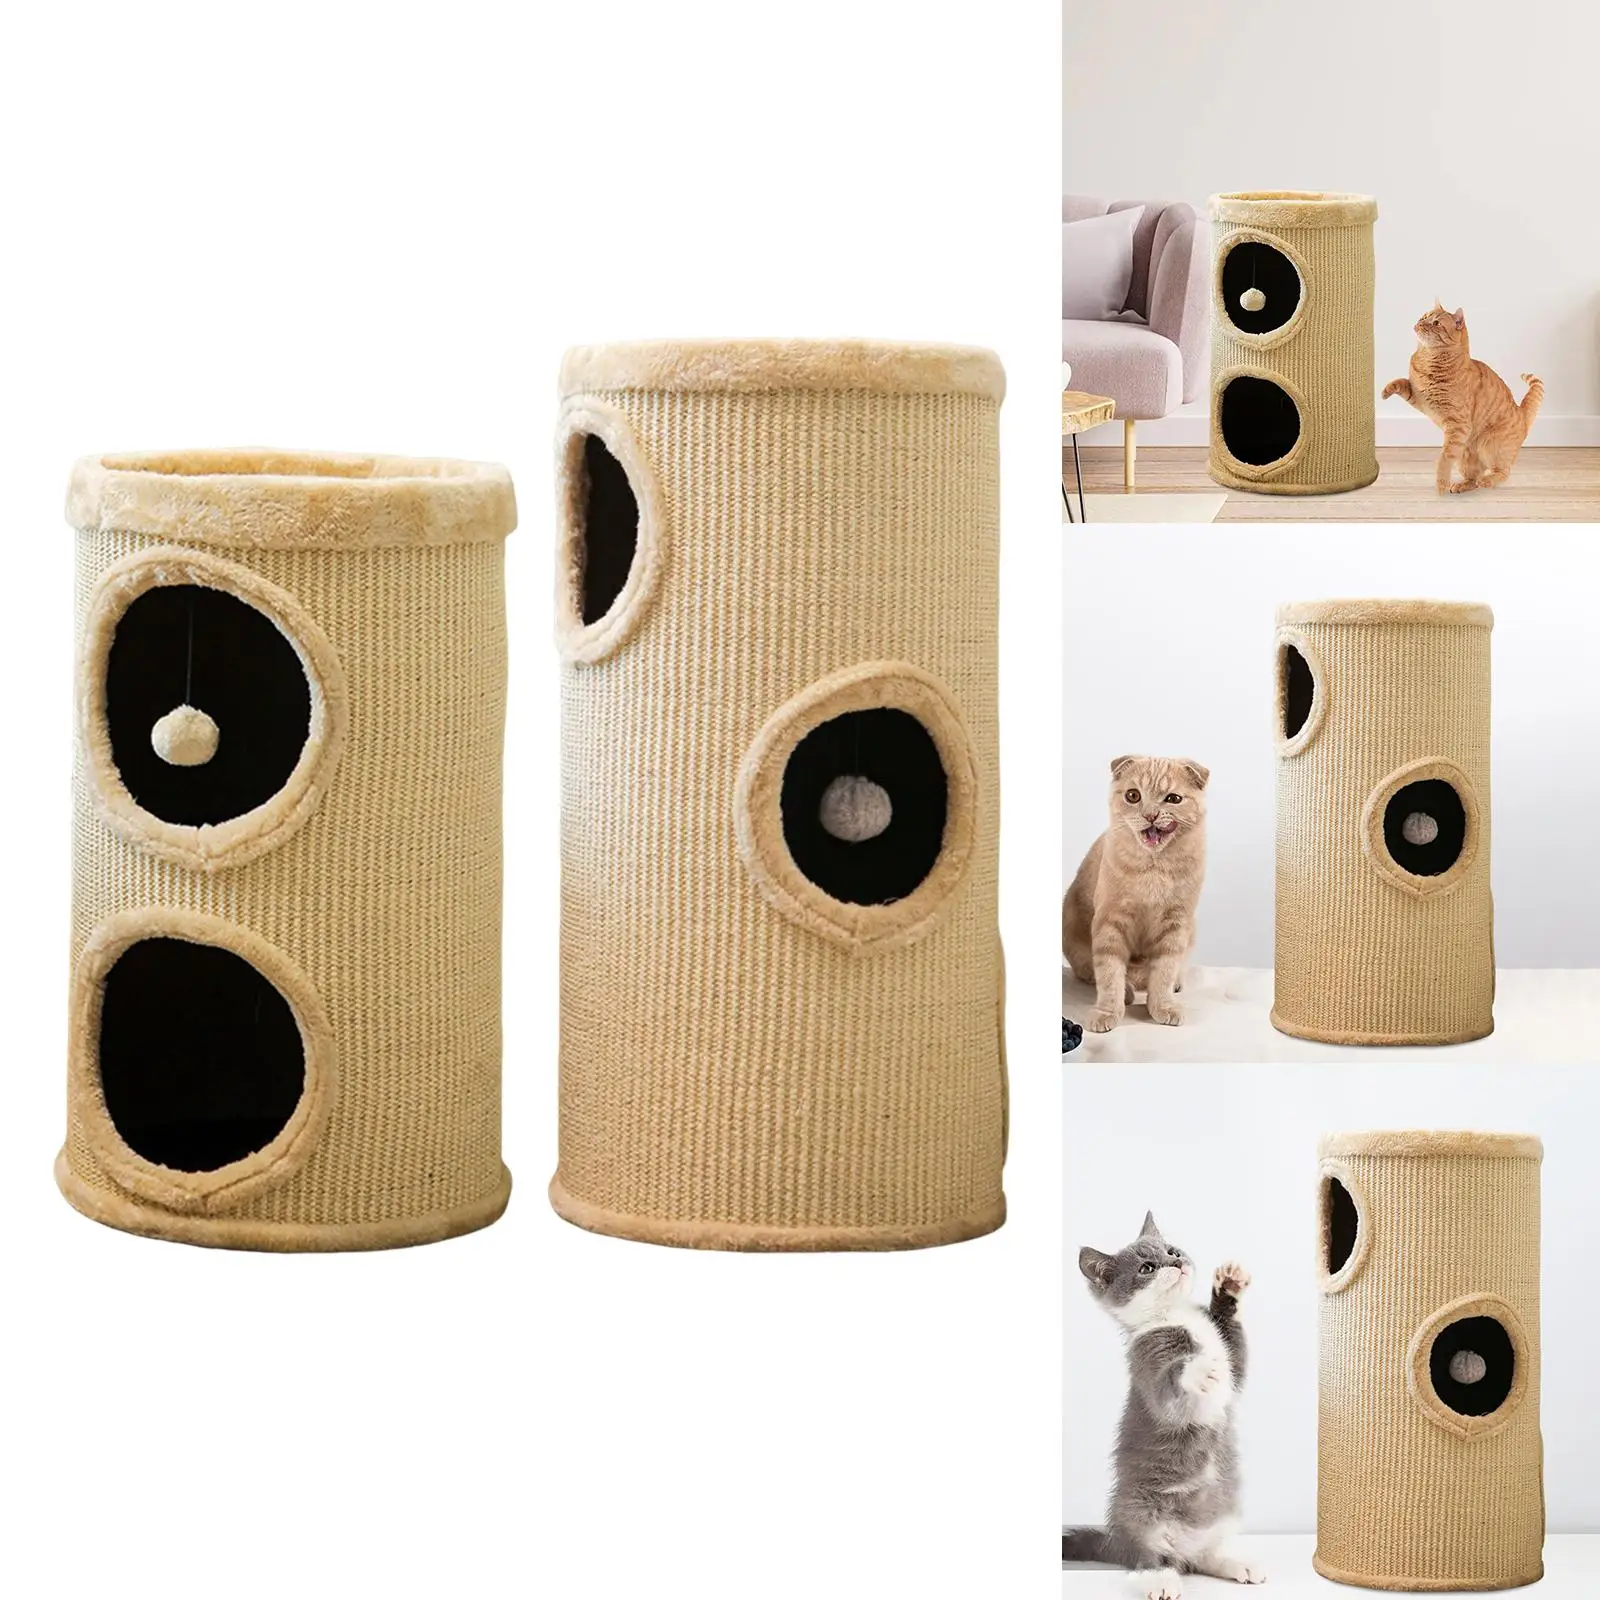 Durable Cat Climbing Frame Pet House Interactive Training Funny Activity Center Scratching for Indoor Cats Floor Bedroom